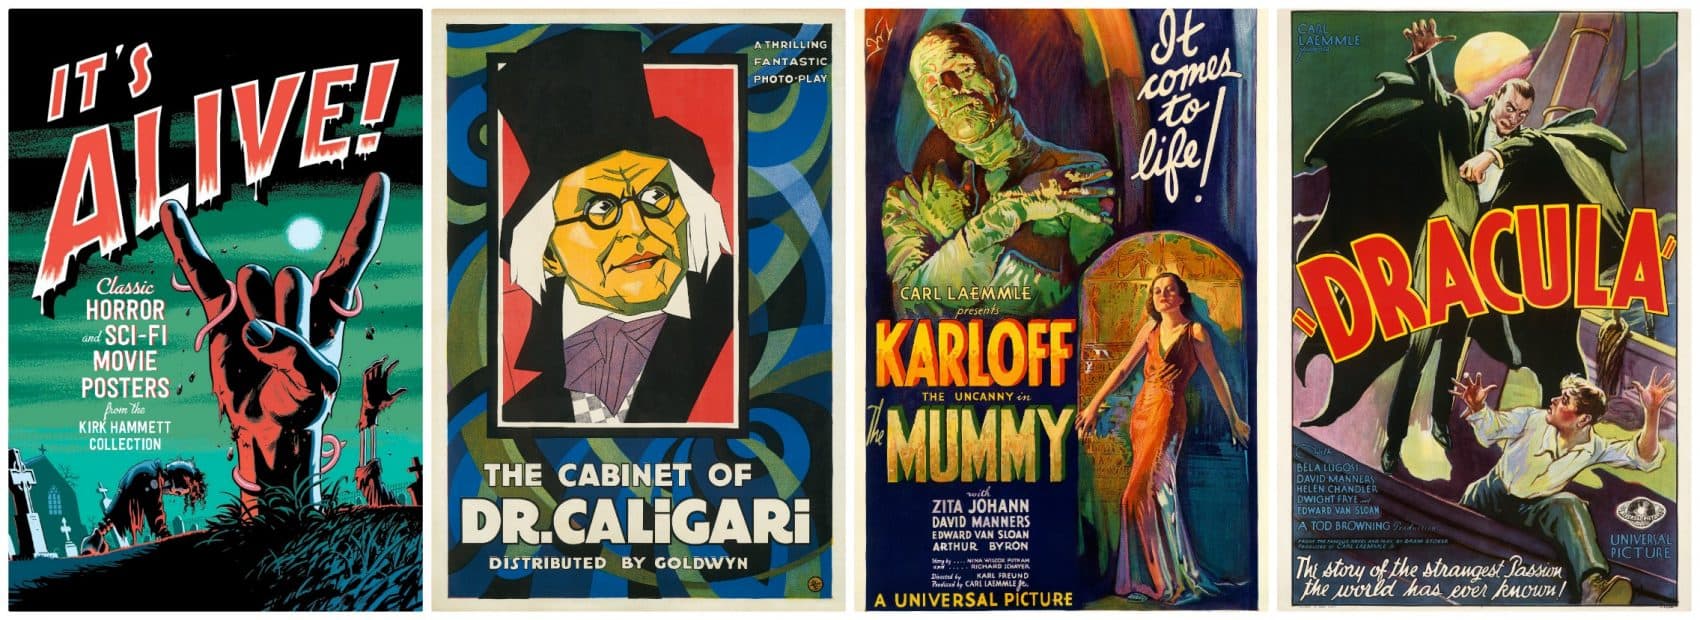 A few of the old movie posters on display at the PEM. (Courtesy Collection of Kirk Hammett)